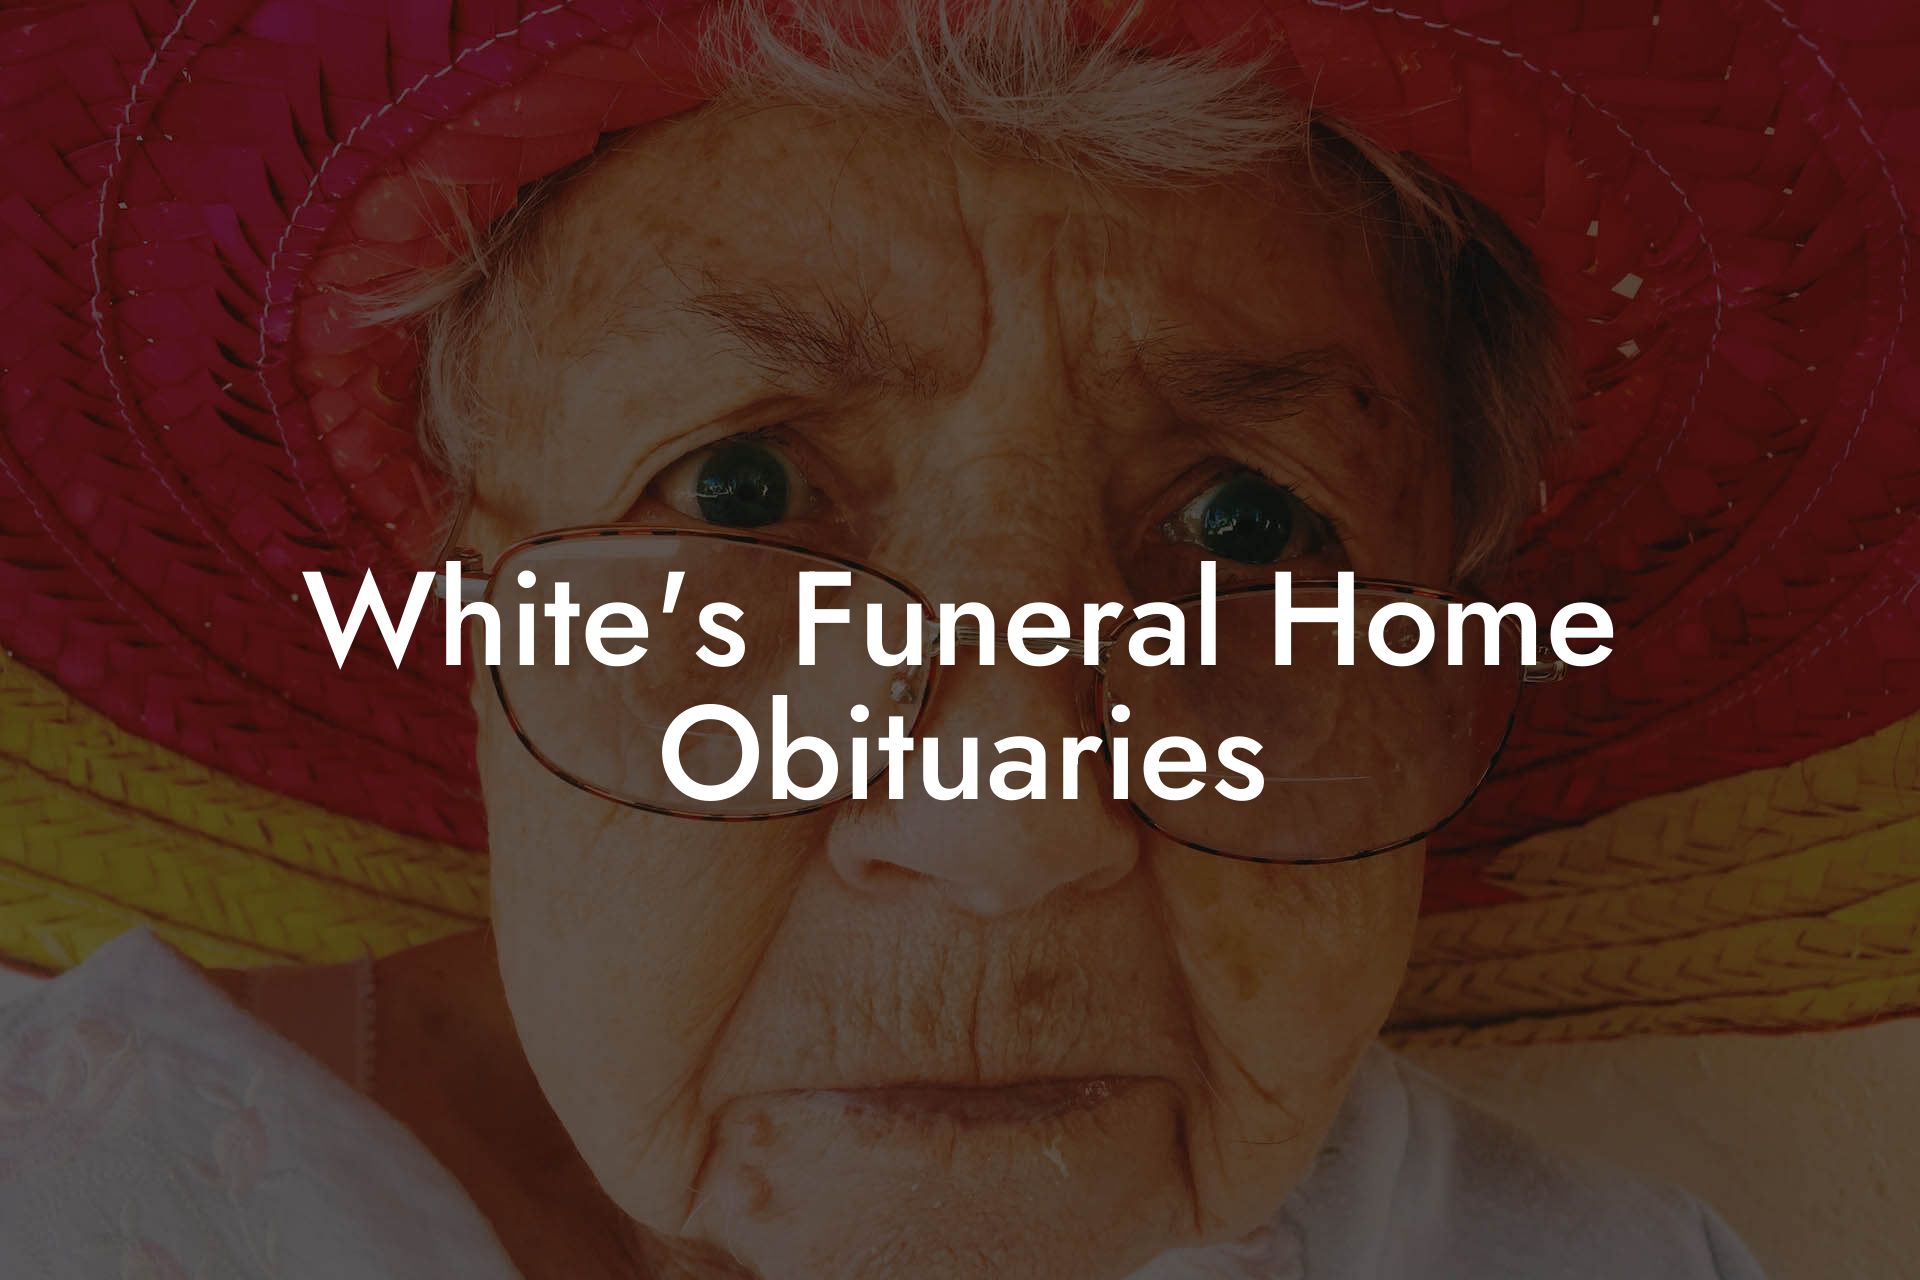 White's Funeral Home Obituaries